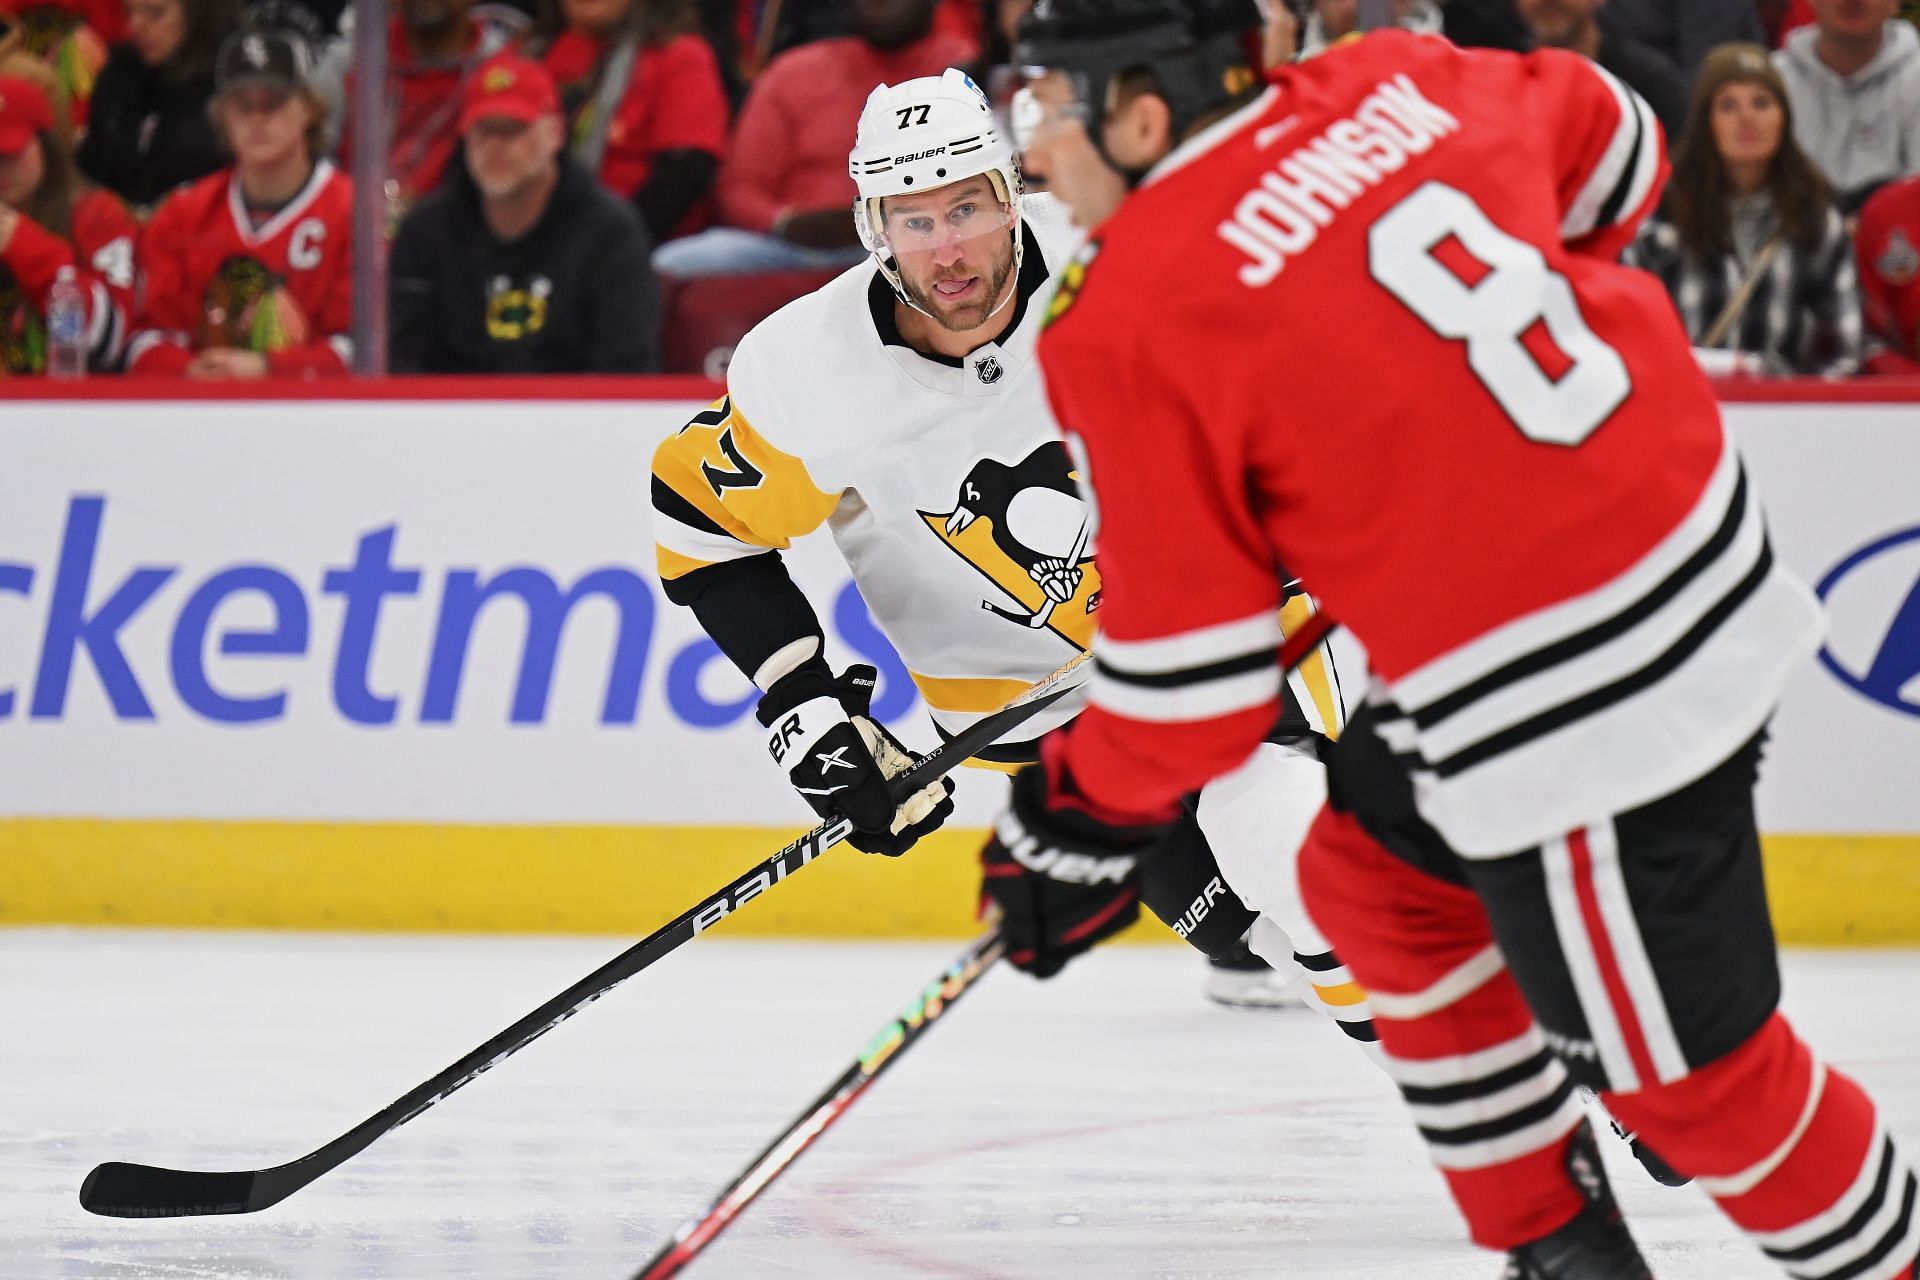 Pittsburgh Penguins v Chicago Blackhawks Live streaming options, how and where to watch NHL live on TV, channel list, and more